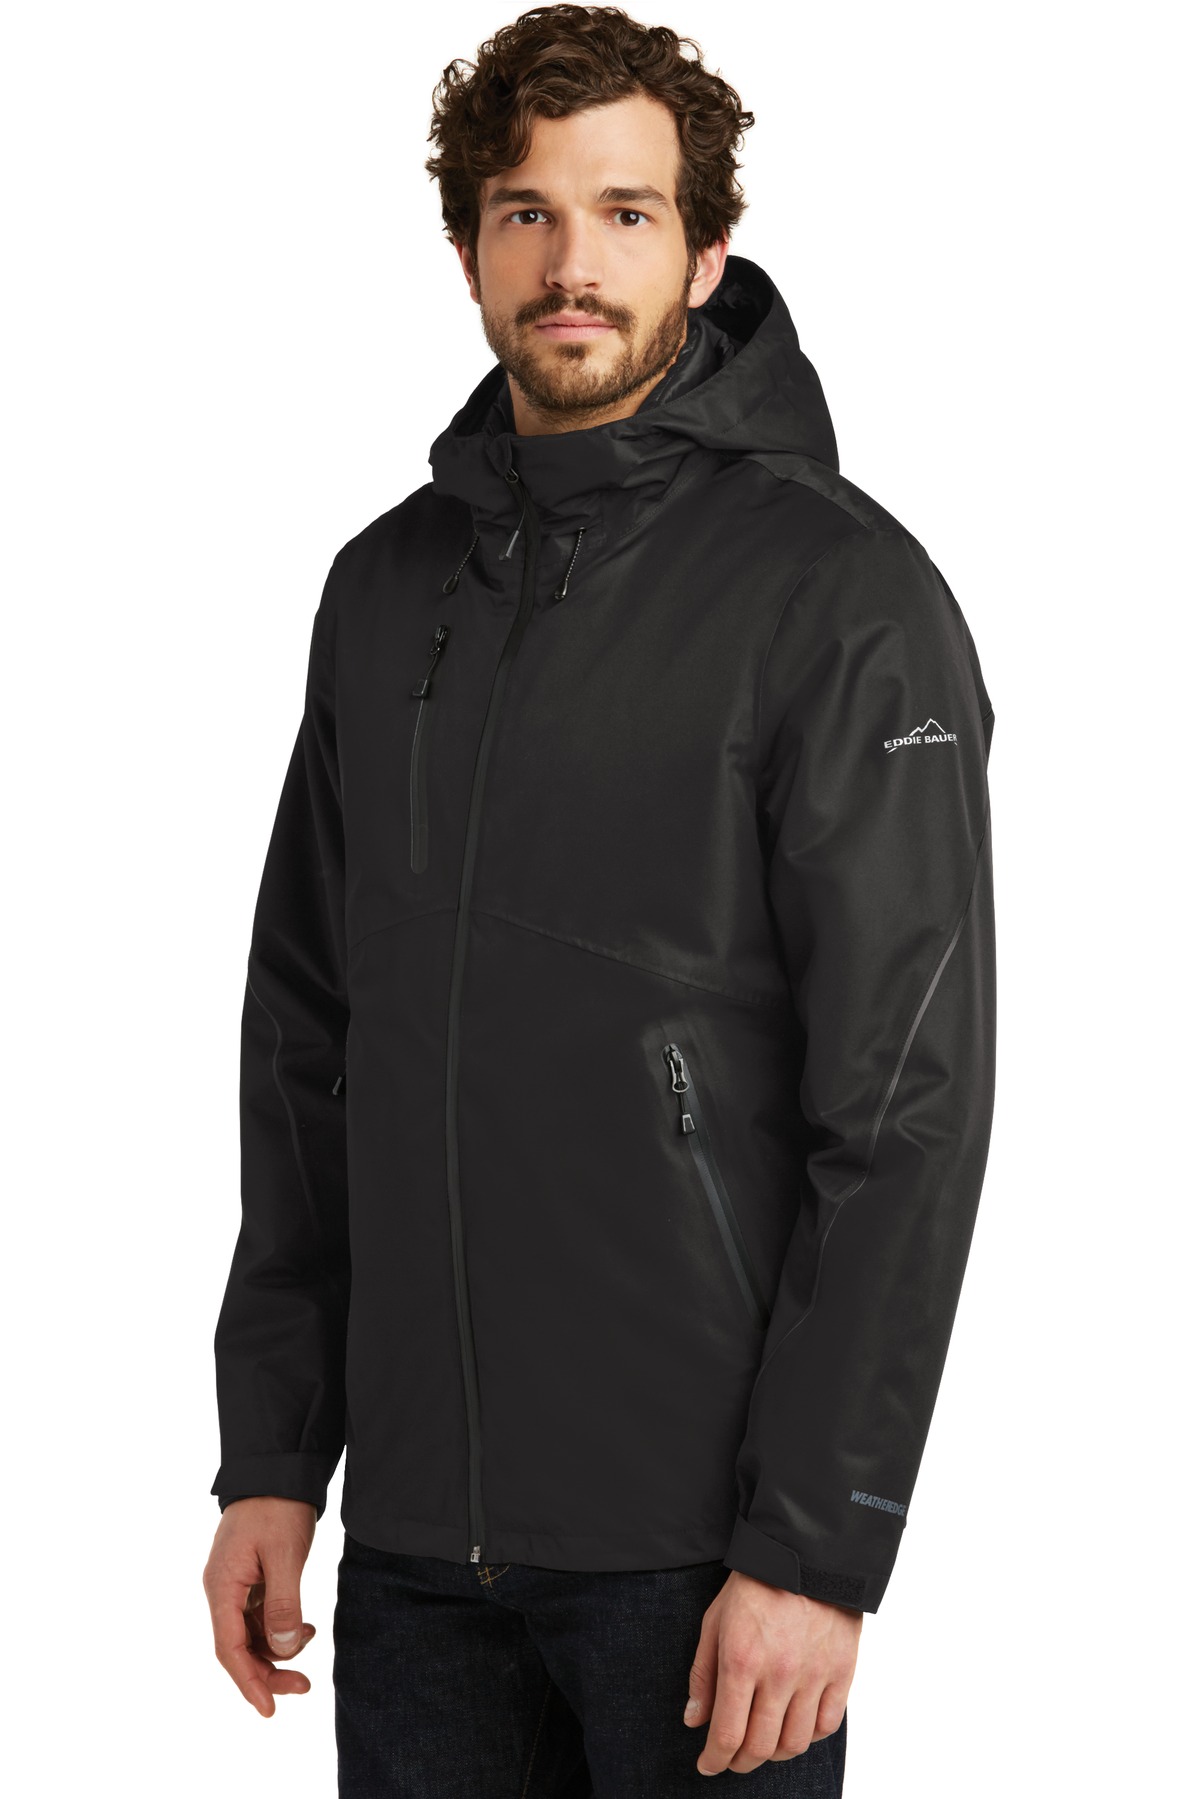 Eddie Bauer WeatherEdge Plus 3-in-1 Jacket. EB556 | Blank Apparel by ZOME